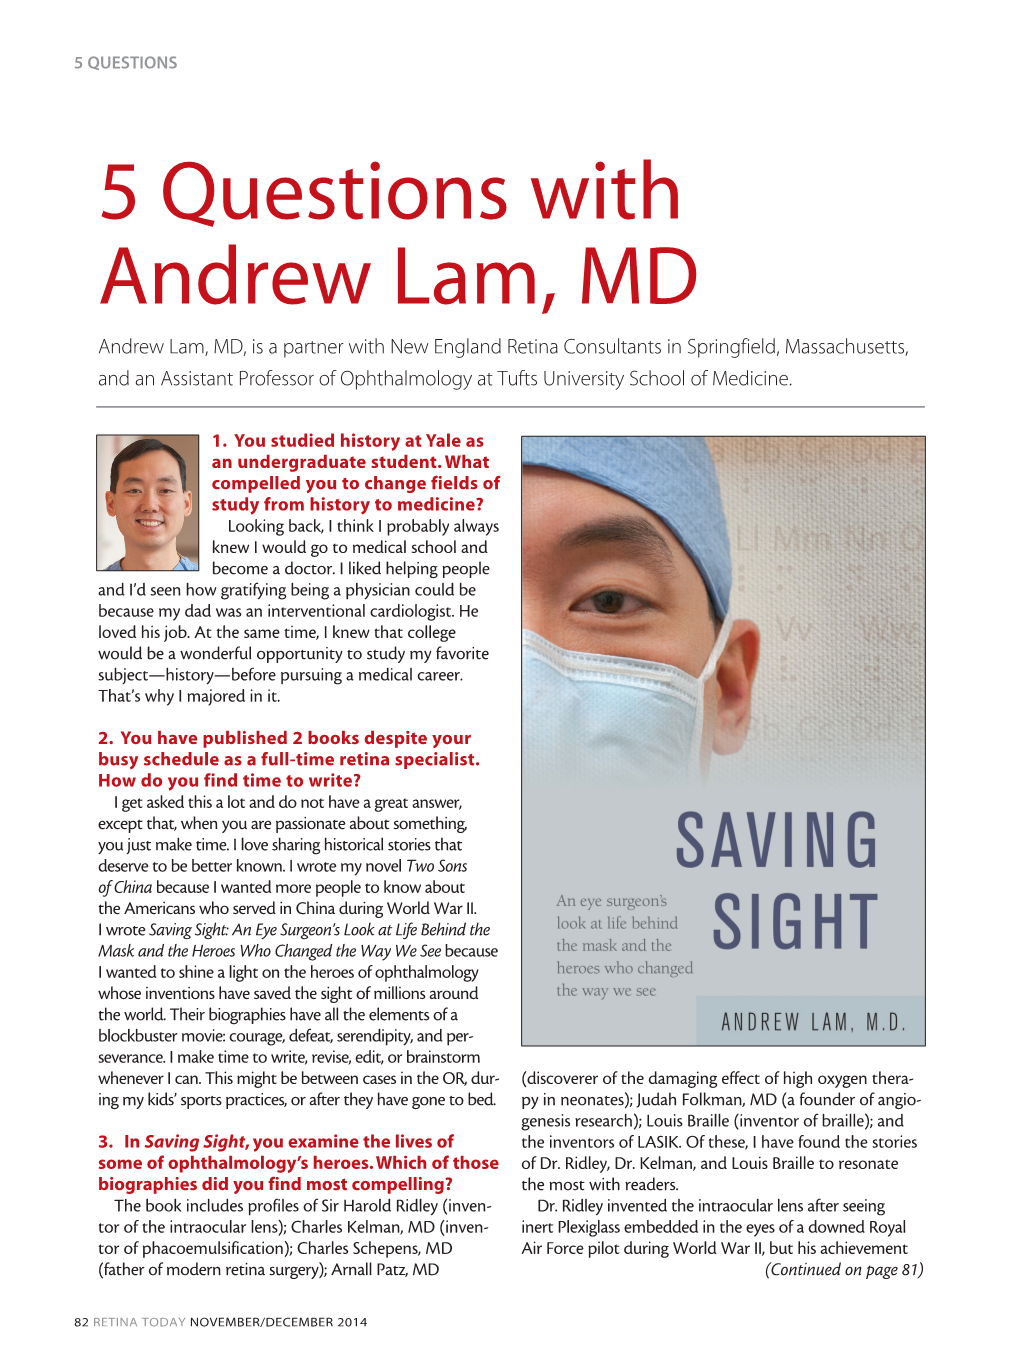 5 Questions with Andrew Lam, MD